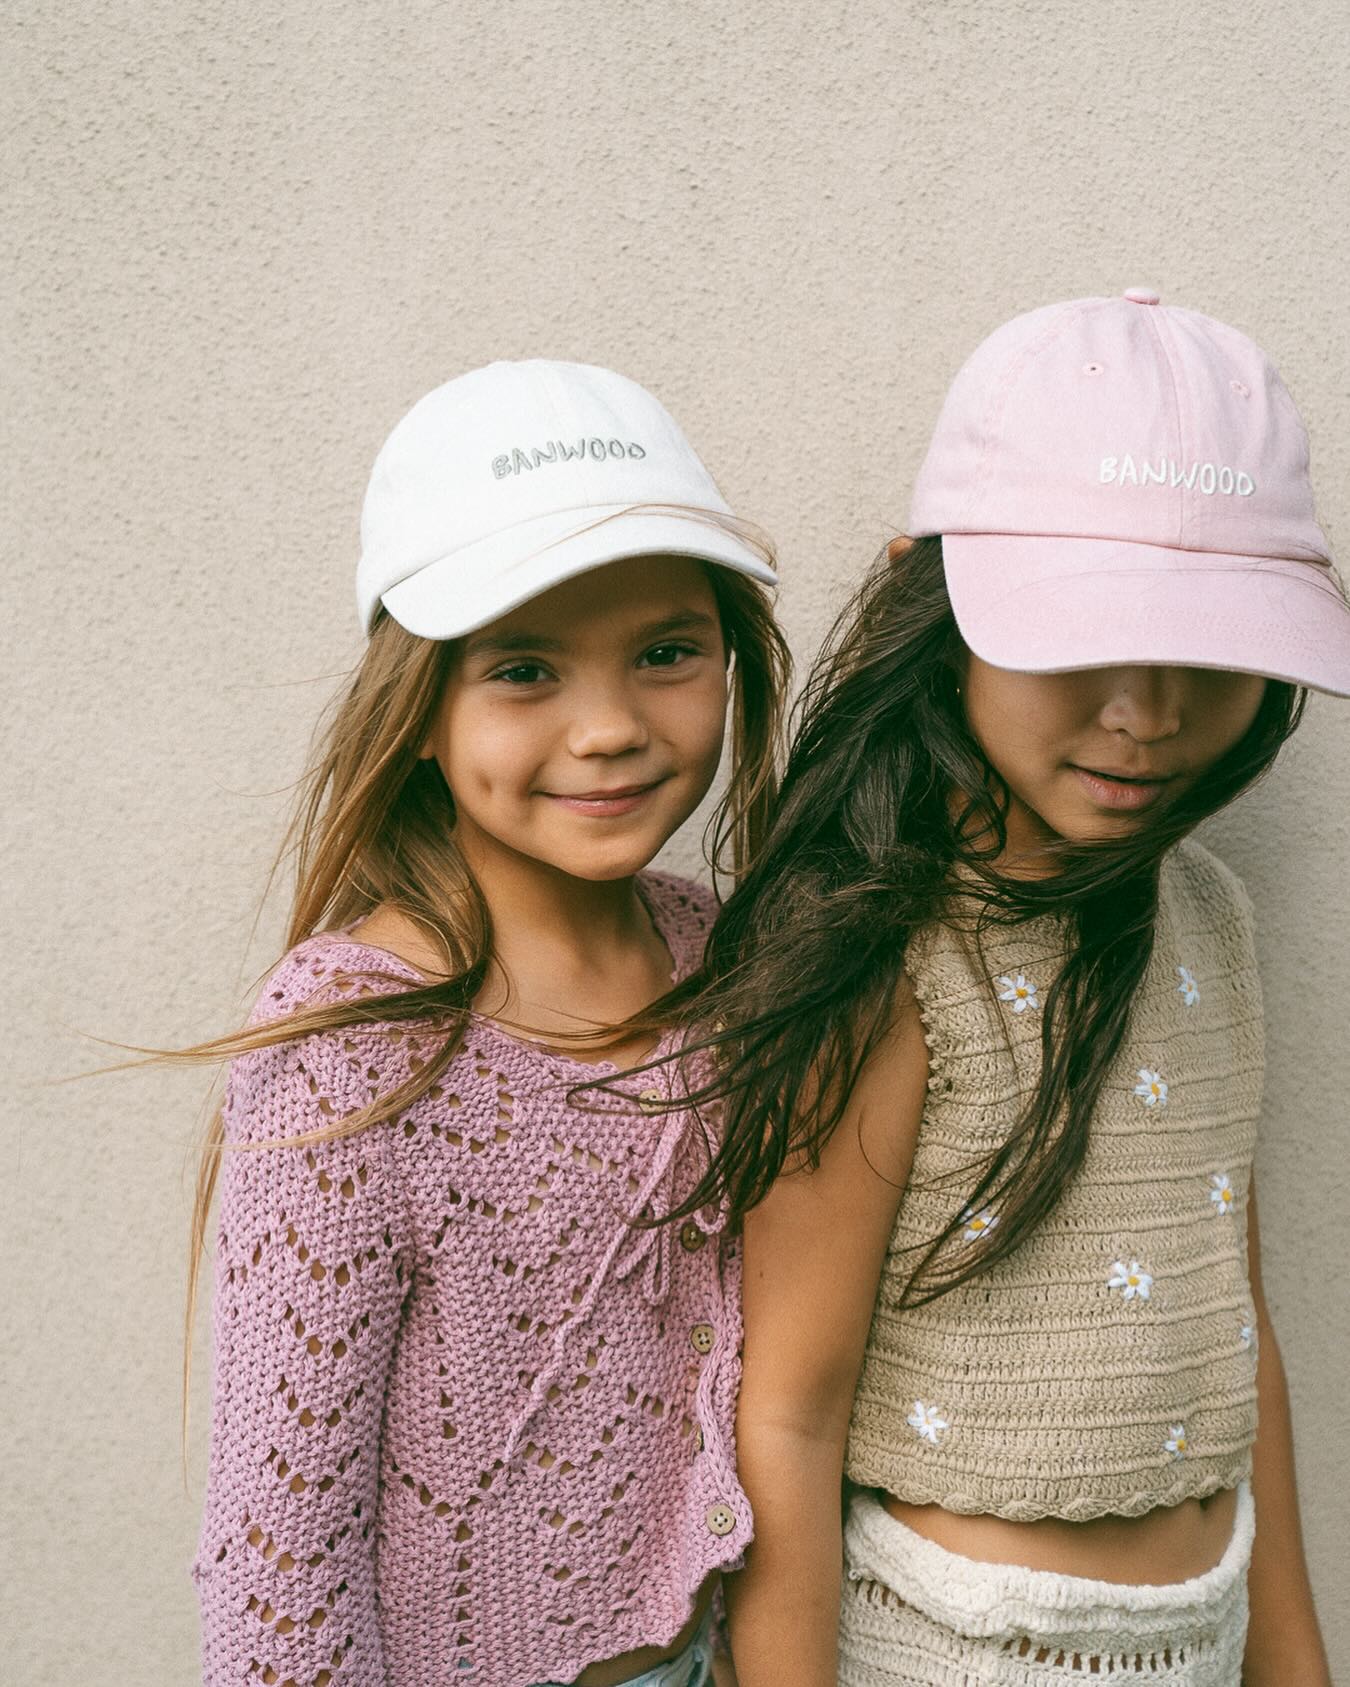 Make sure to protect your child from the sun. Caps are the perfect summer accessory for all your sunny adventures. They come in various solid colors, making them easy to match for any occasion, and provide excellent sun protection with their 100% soft cotton fabric. Find your favorite color at banwood.com